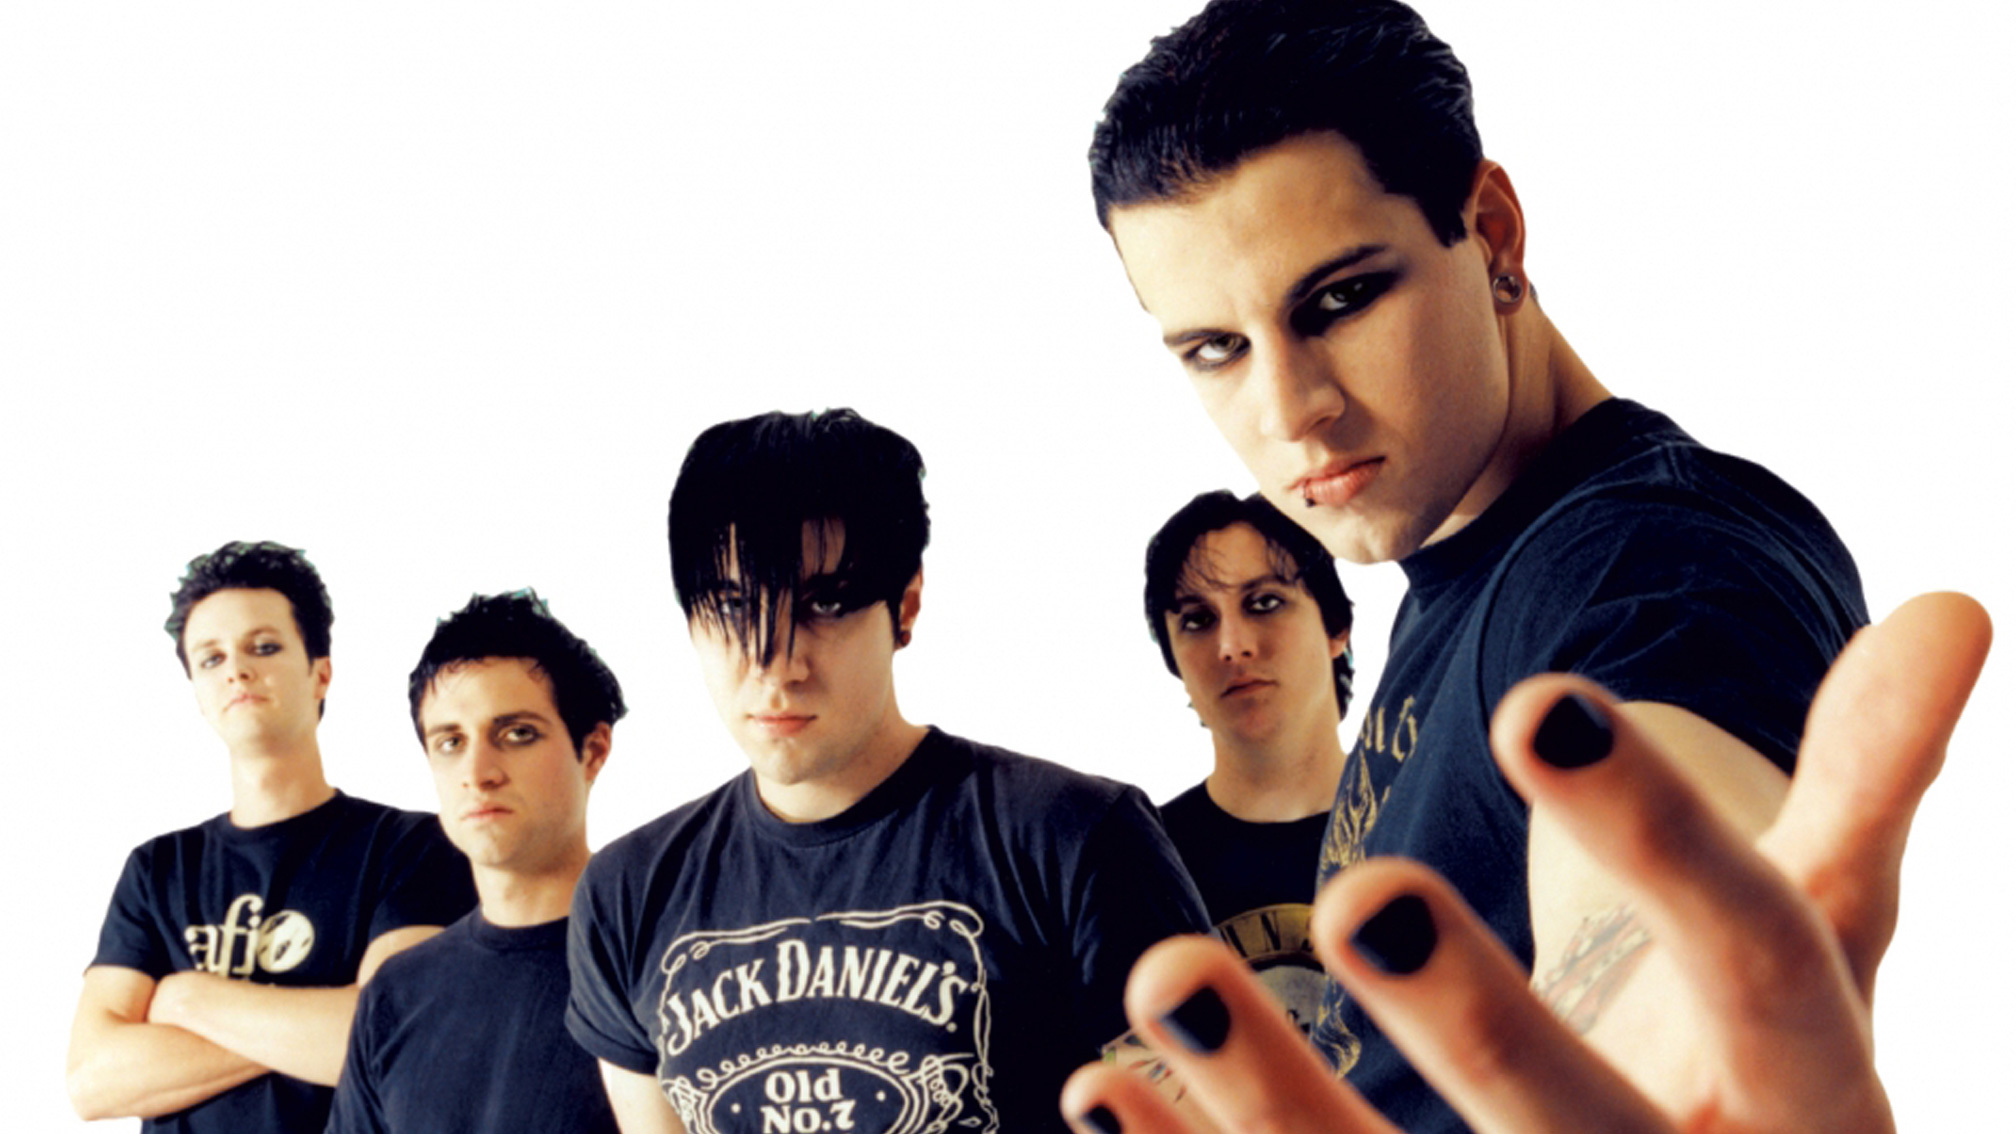 The 20 greatest Avenged Sevenfold songs – ranked